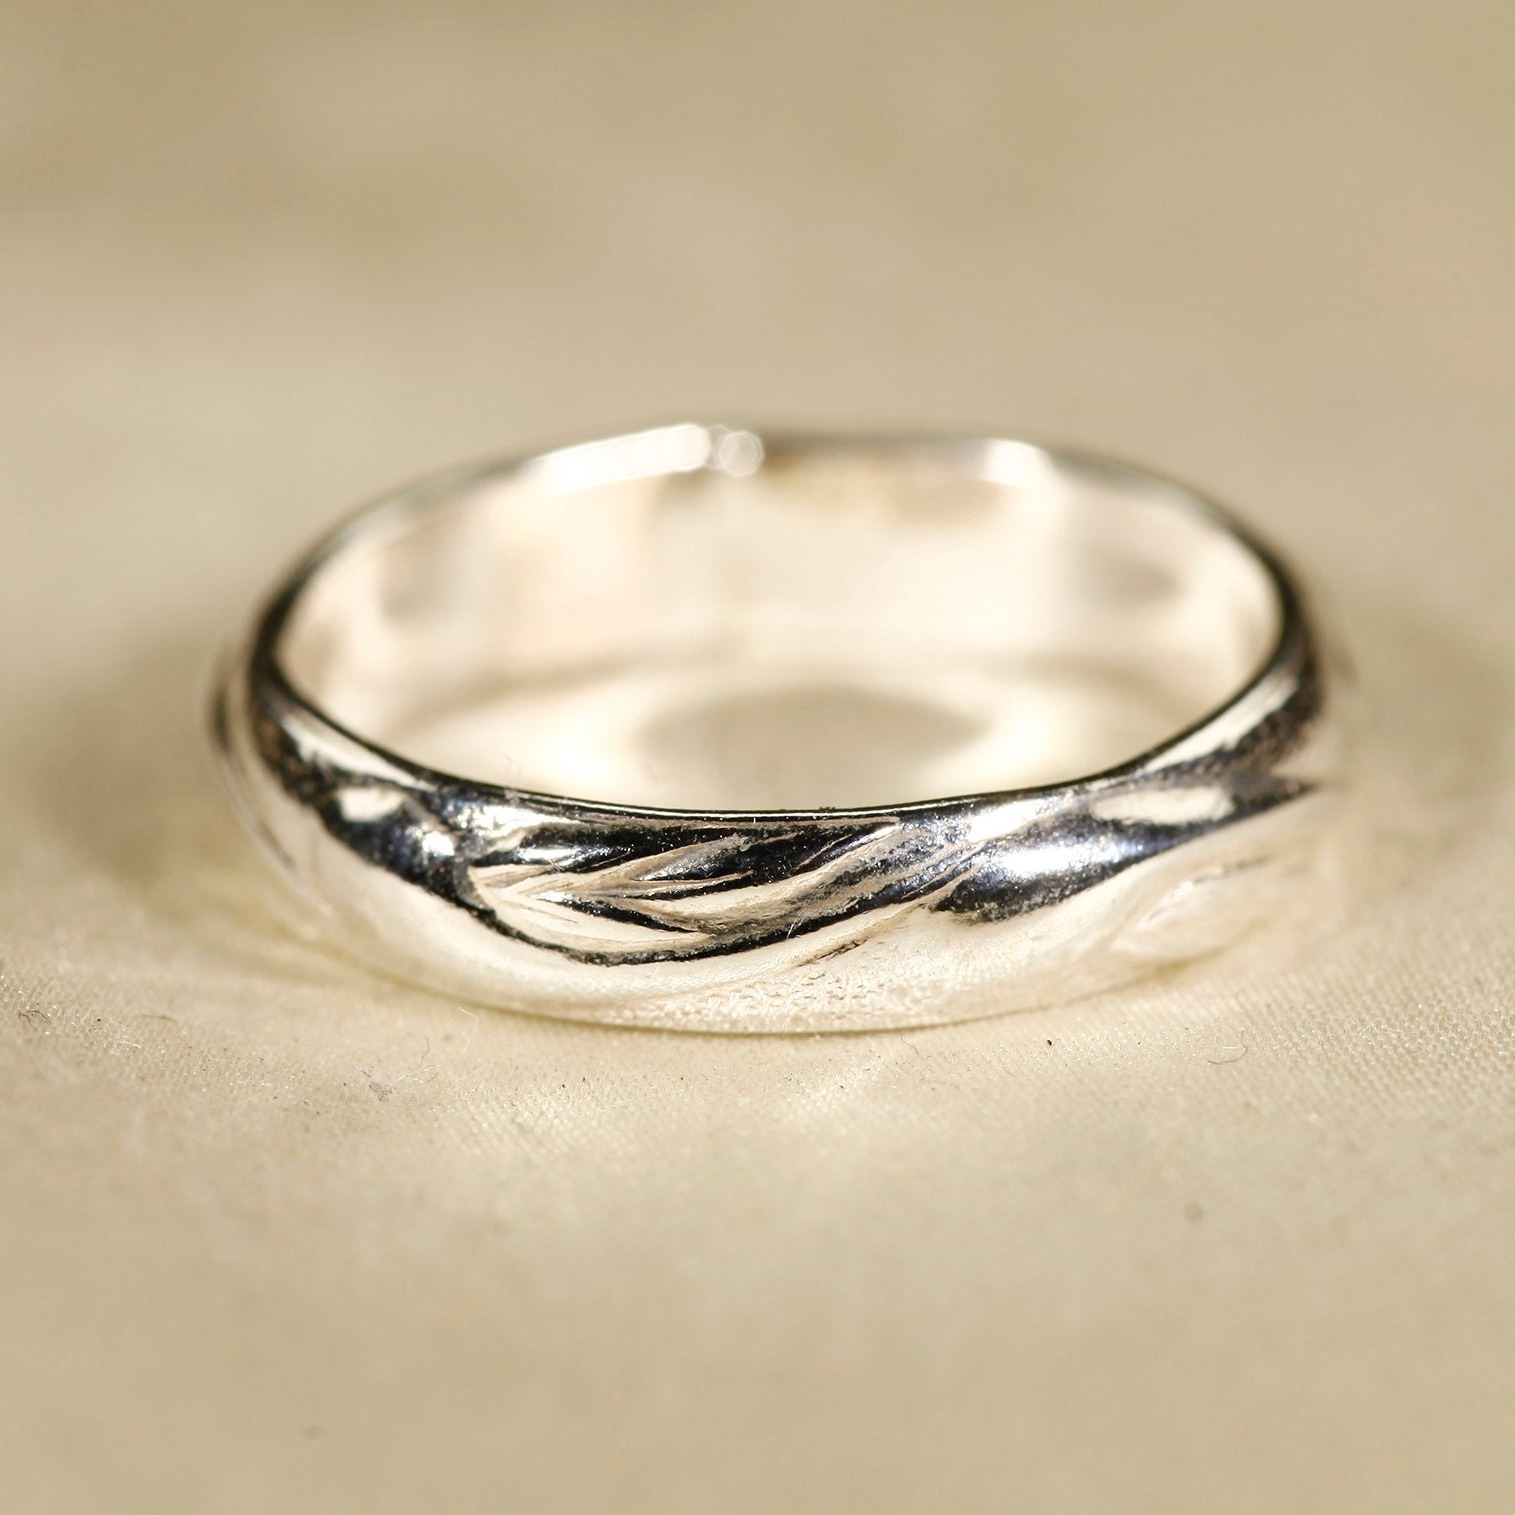 

(2125) 925 Sterling Pattern Thick Ring, Handmade 925 Sterling Silver Ring 4.2mm Width, Handmade In The U.s ( U.s. Standard Sizes)